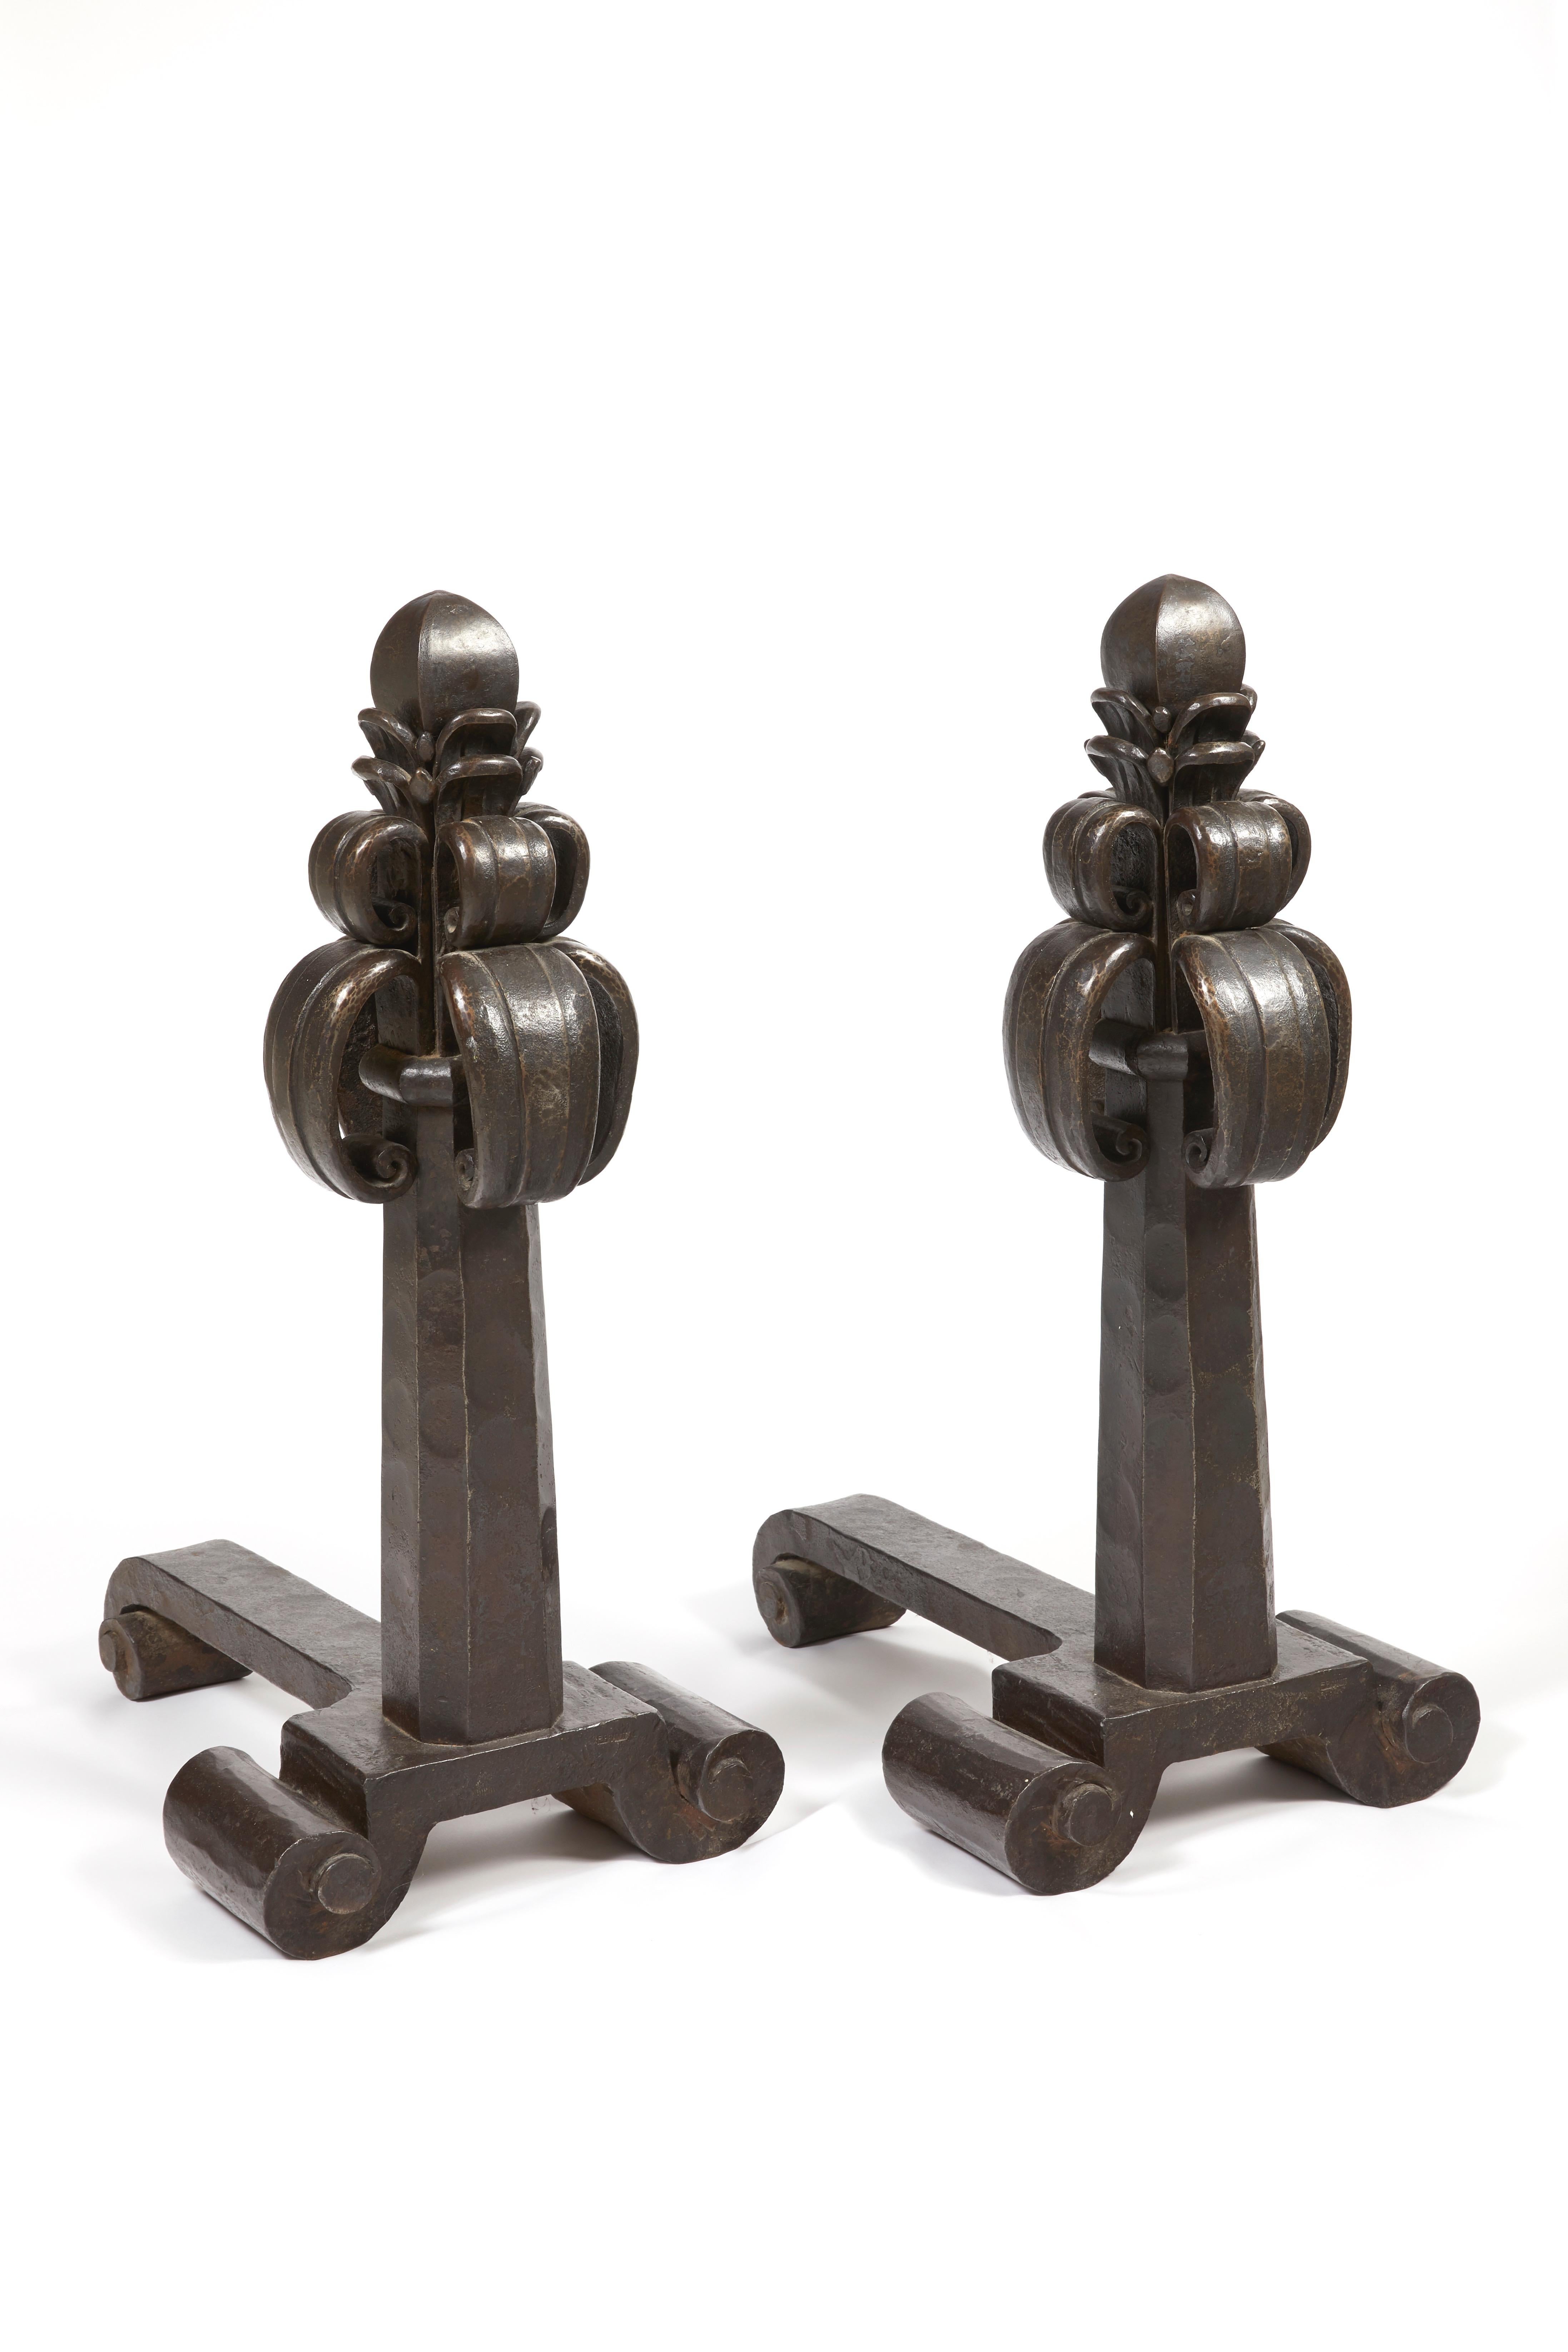 Pair of massive andirons, circa 1920
A pair of hammered wrought iron andirons, decorated with pinnacles and scrolls. Signed.
Measures: H 80 cm (H 31.5 in).